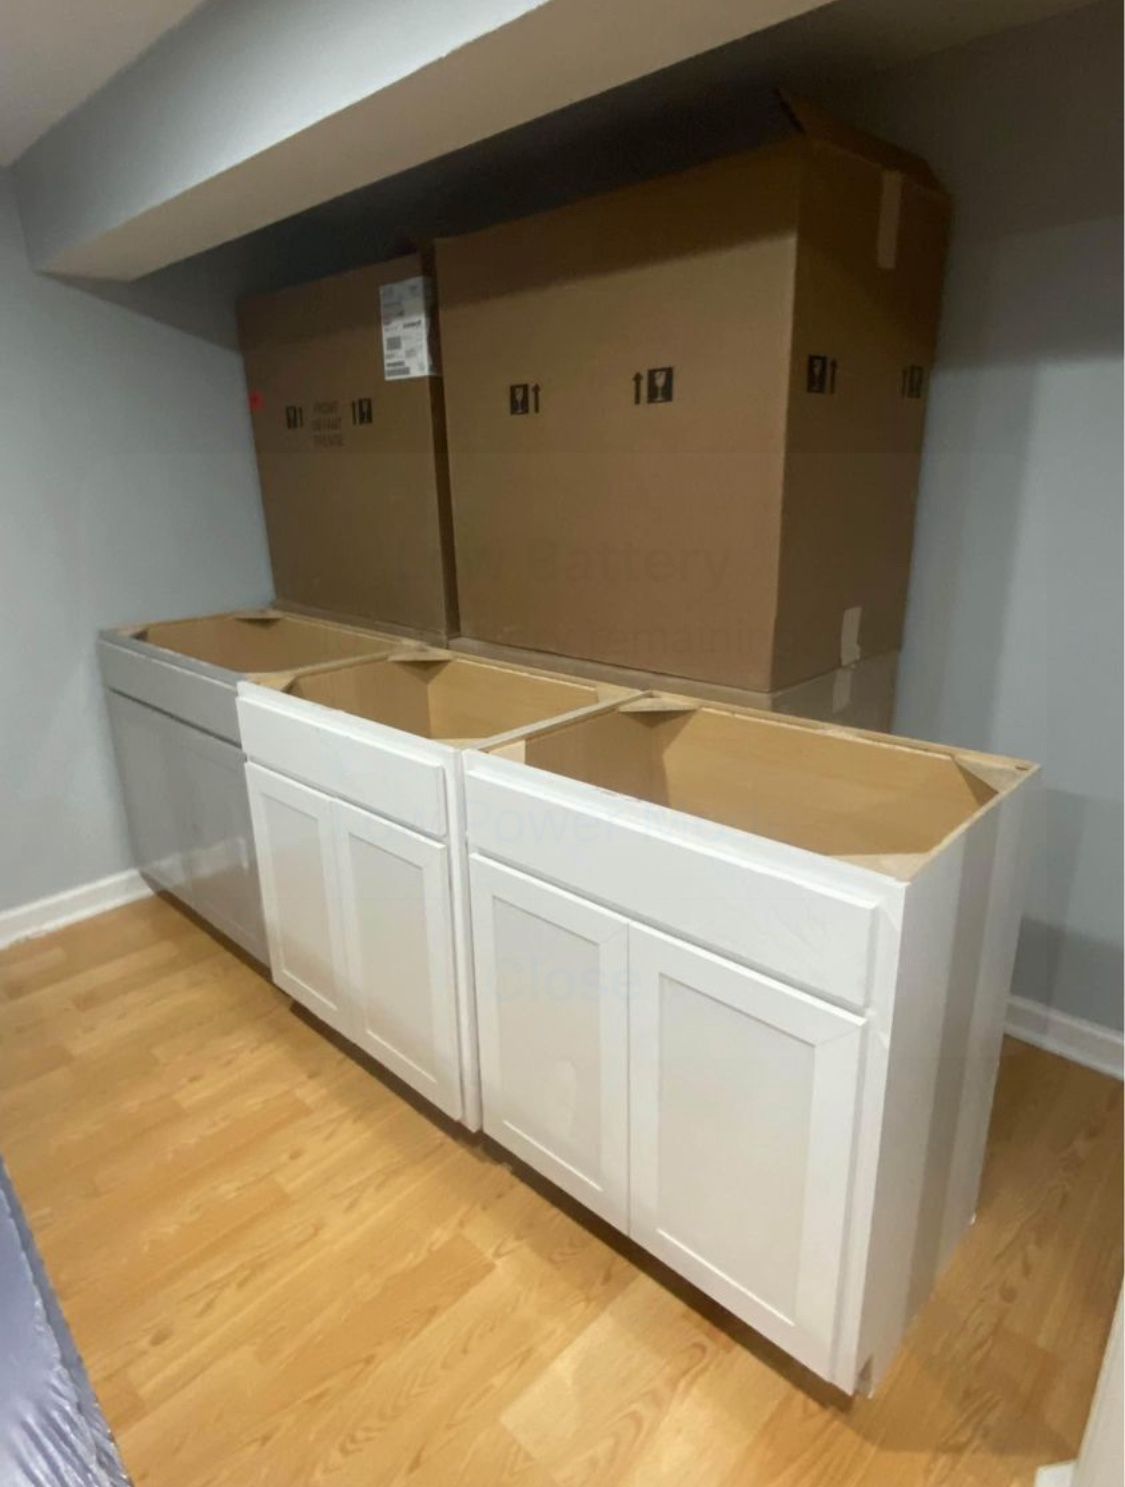 Brand New Cabinets 30” $150 each 